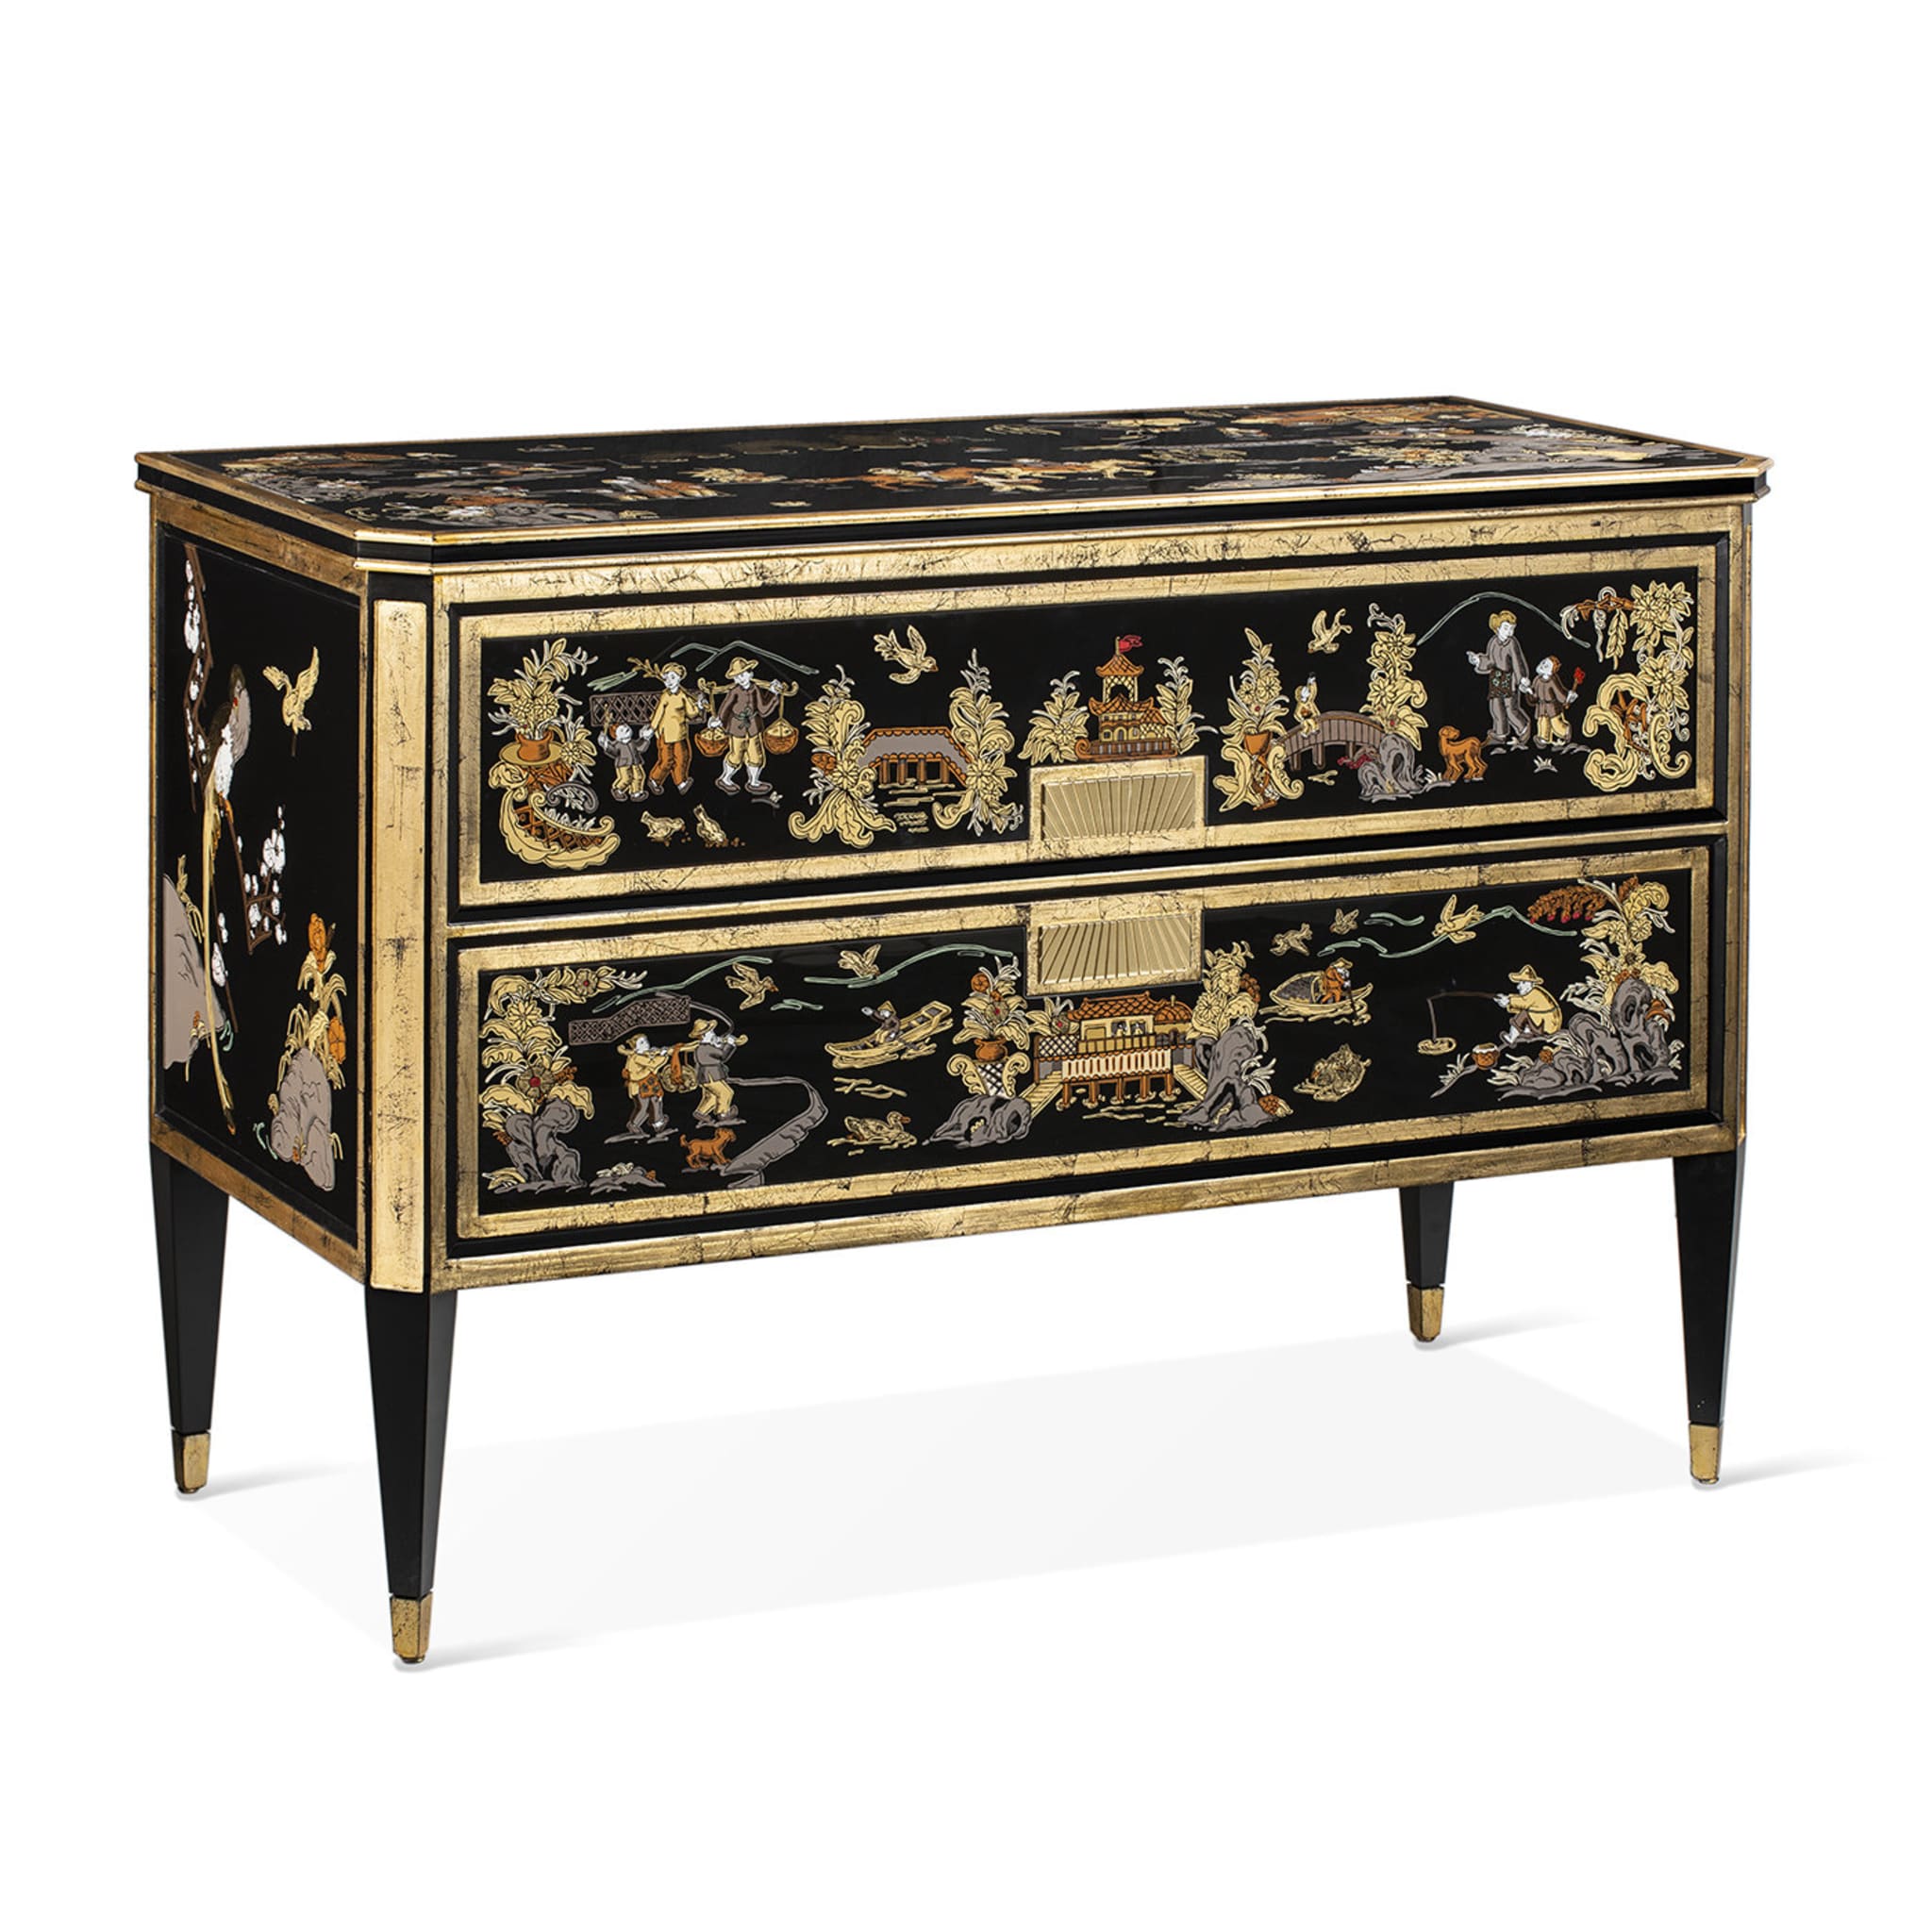 Louis XVI dresser with Hand-Painted Decorations 8708 - Alternative view 1